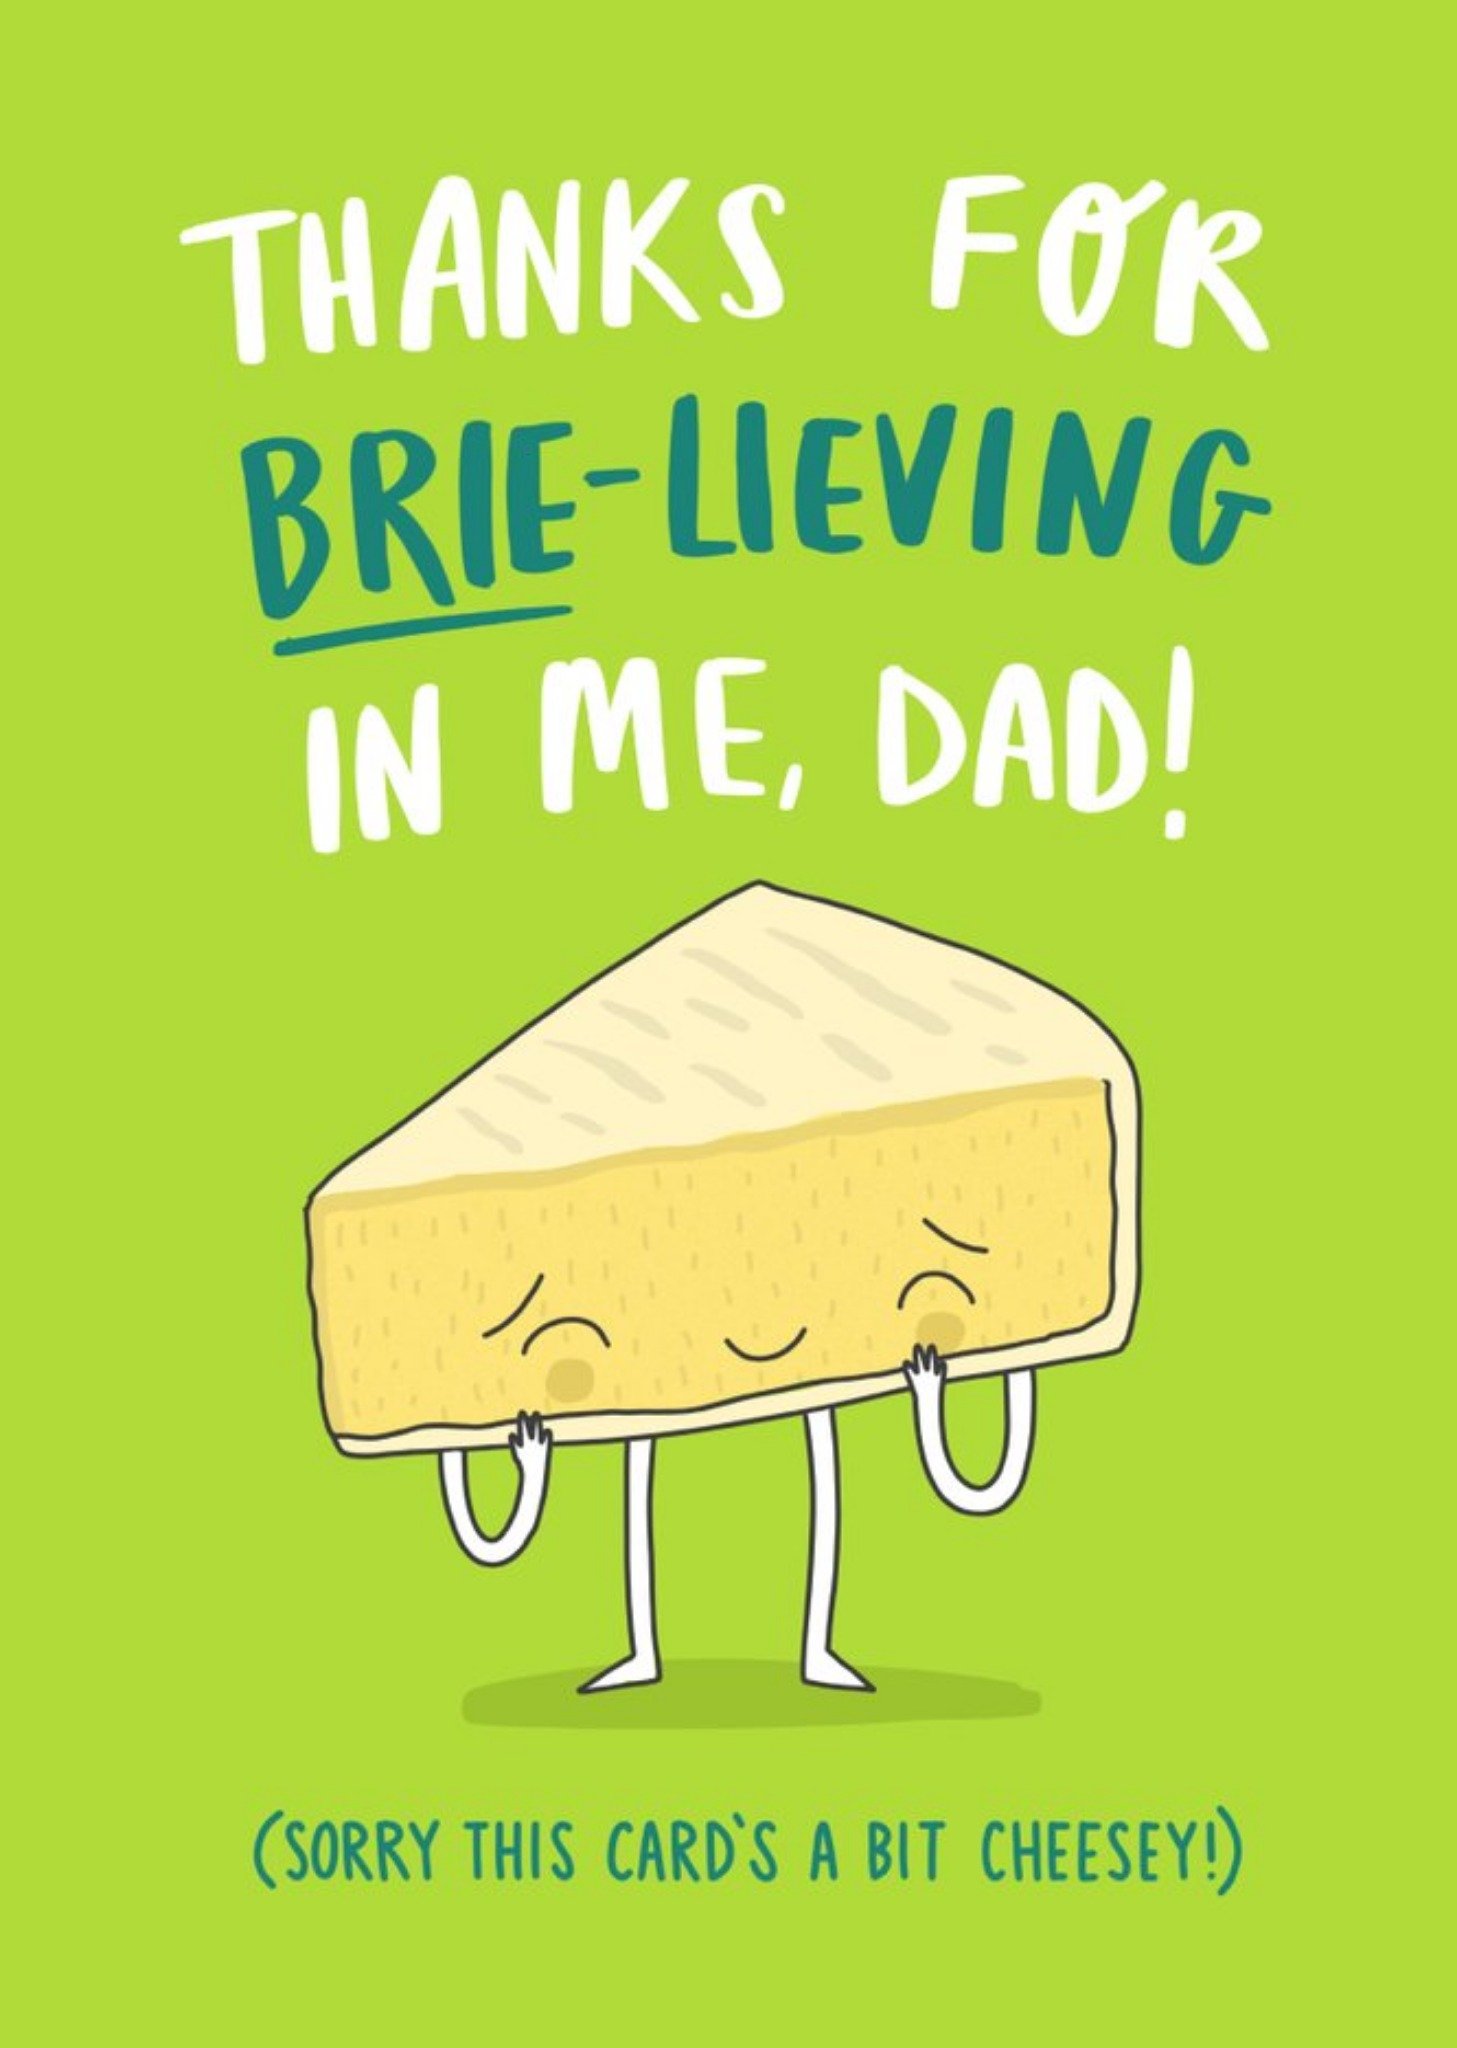 Moonpig Funny Thanks For Brie-Lieving In Me Dad Cheese Thank You Card Ecard